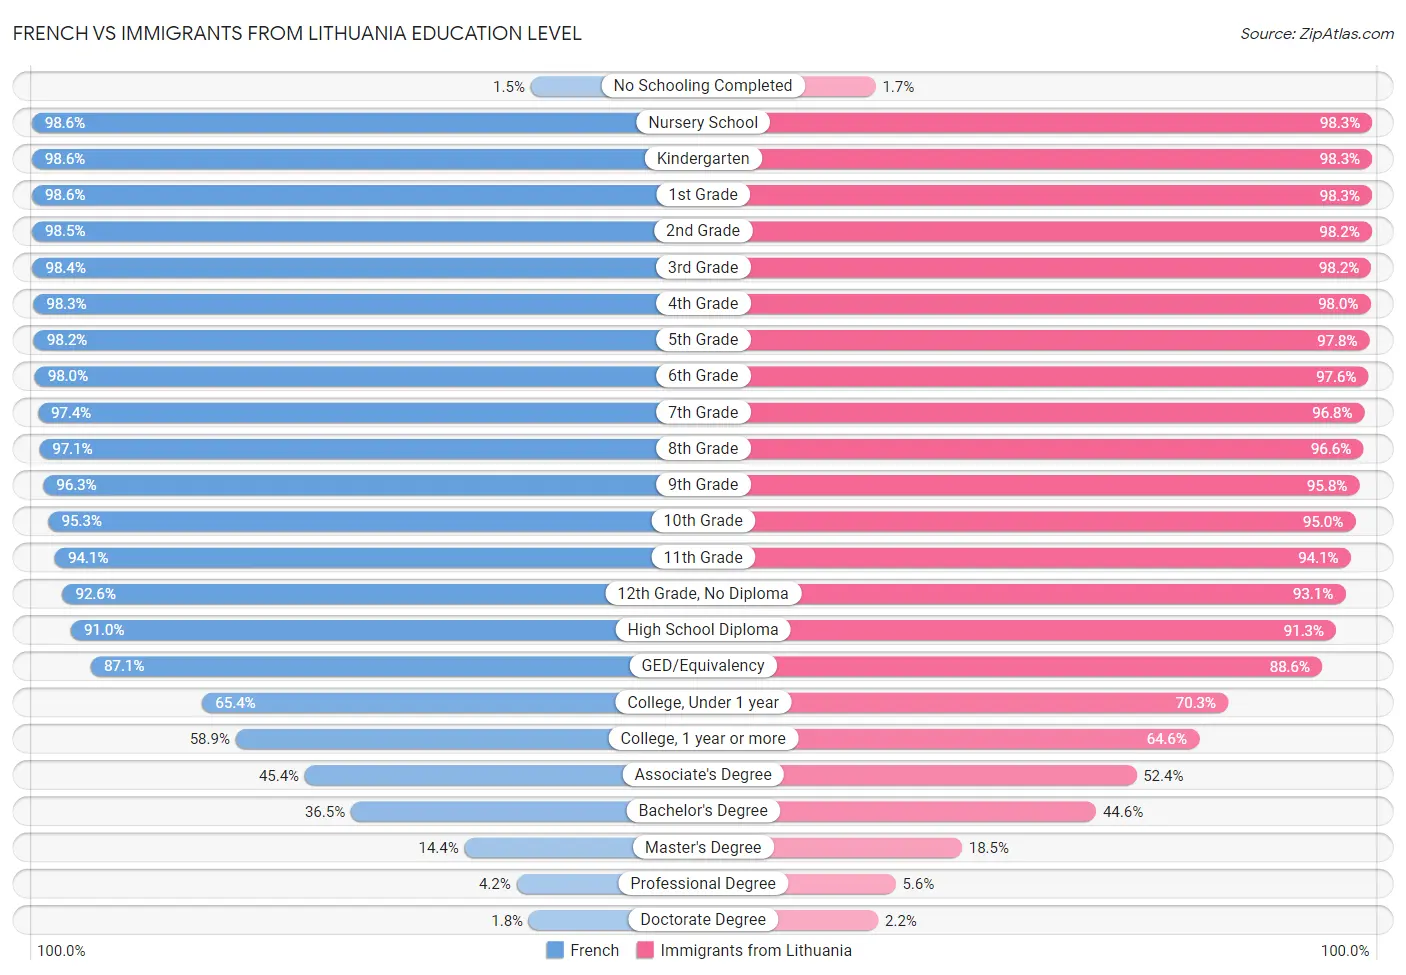 French vs Immigrants from Lithuania Education Level